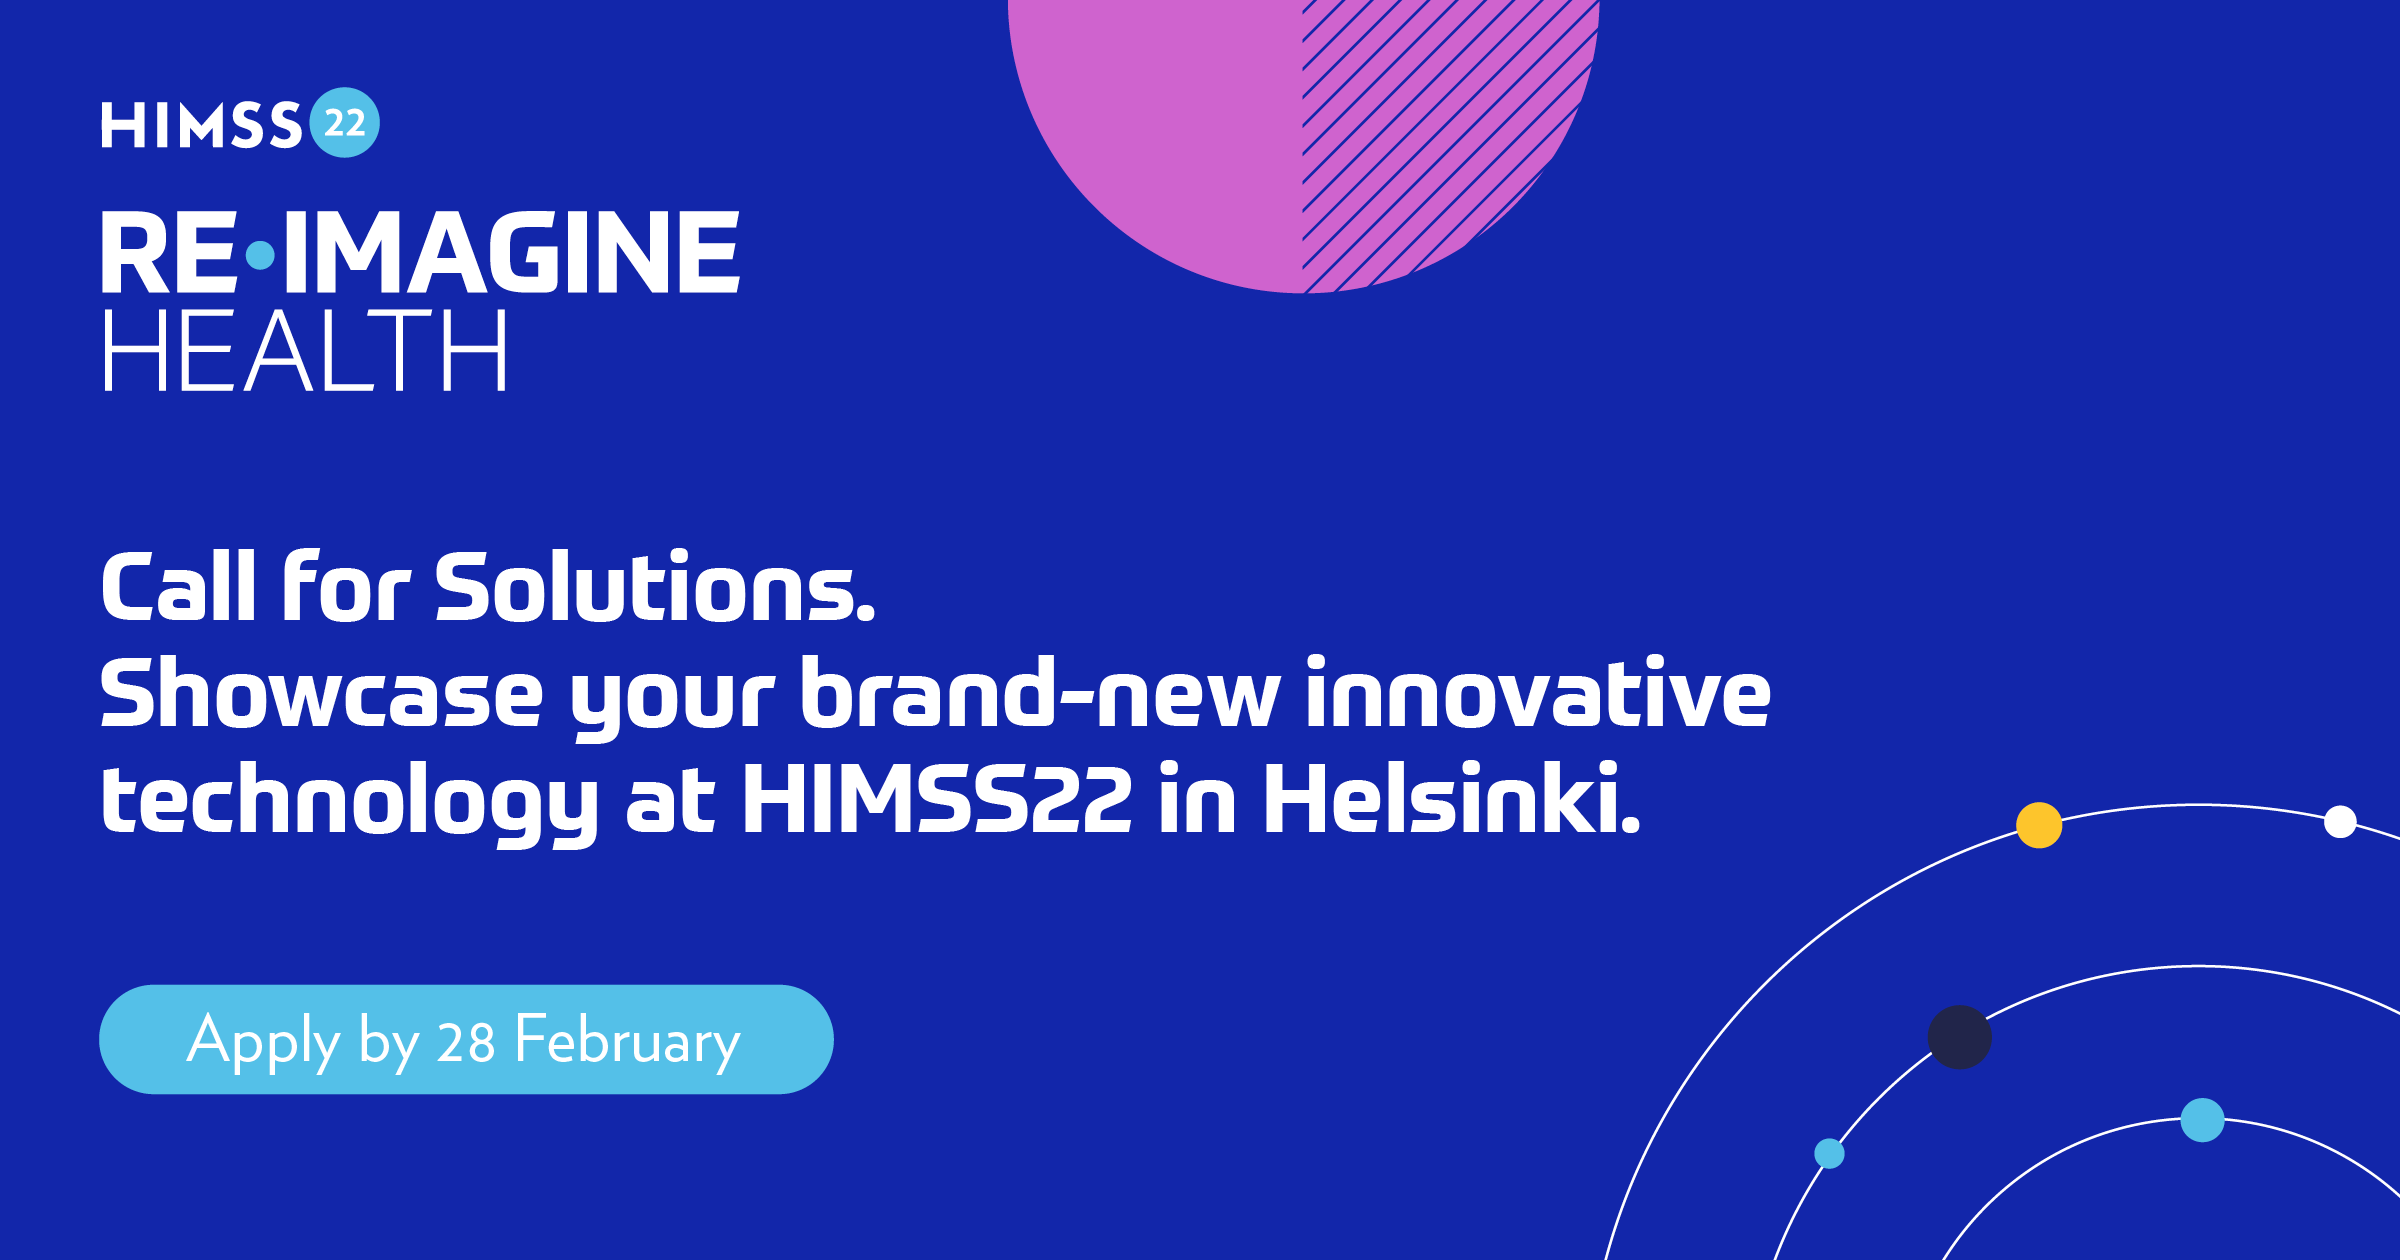 HIMMS opens Call for Solutions for the HIMSS22 European Health Conference & Exhibition - #BHHMembersInitiatives